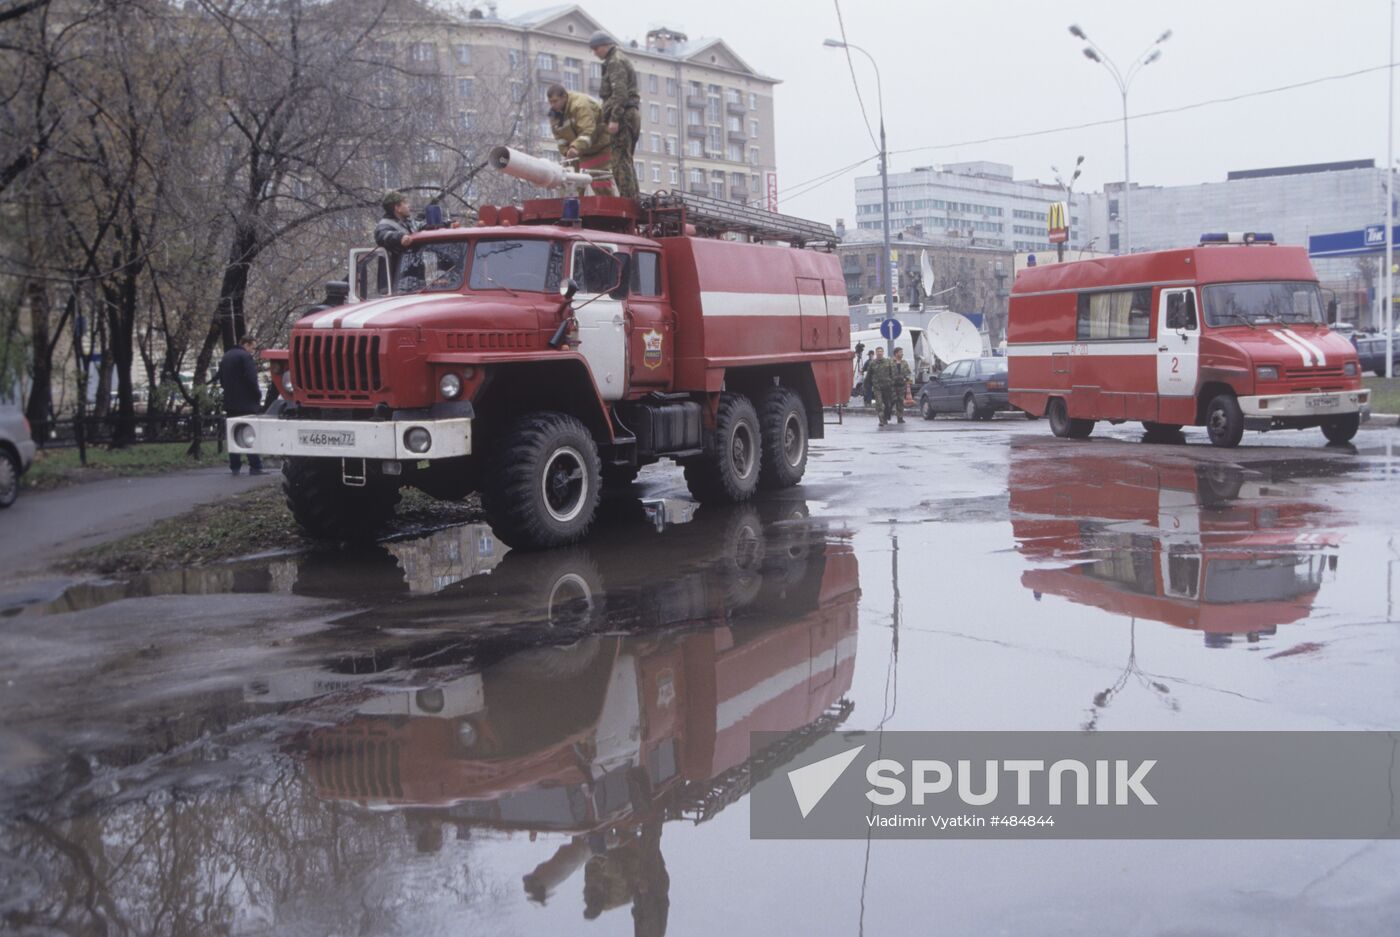 Firefighters at Moscow Theater, Dubrovka area